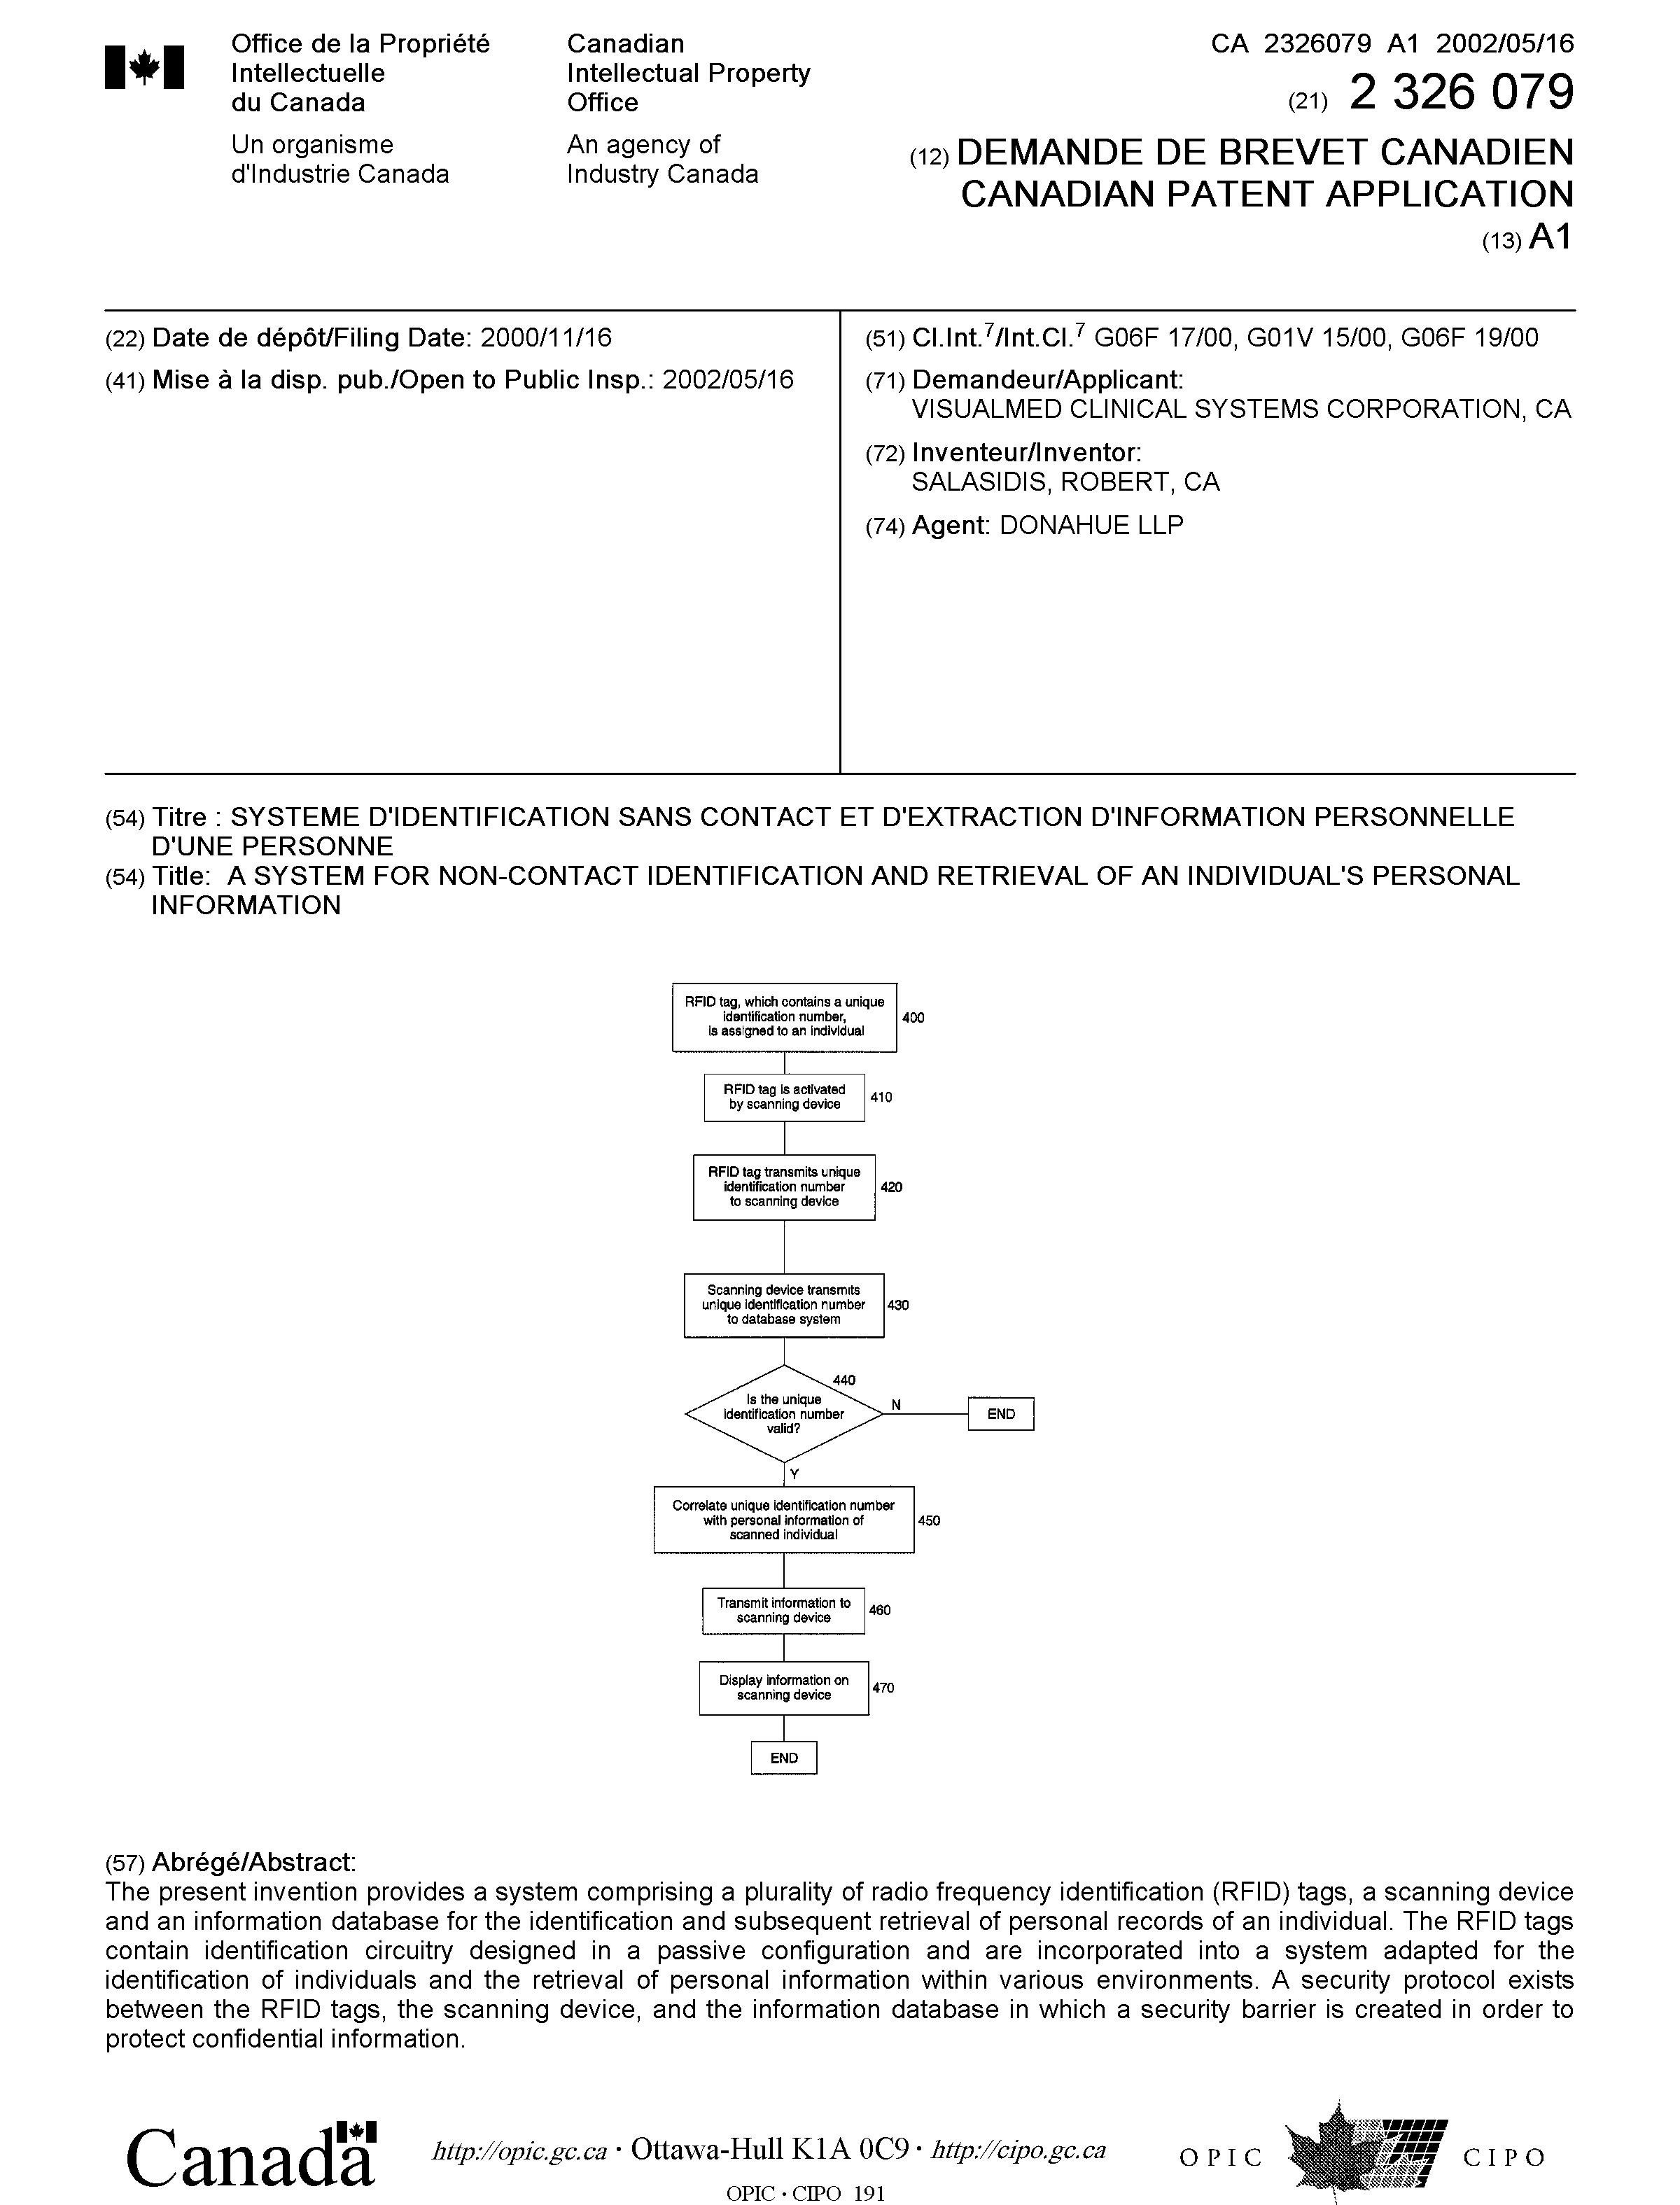 Canadian Patent Document 2326079. Cover Page 20020510. Image 1 of 1